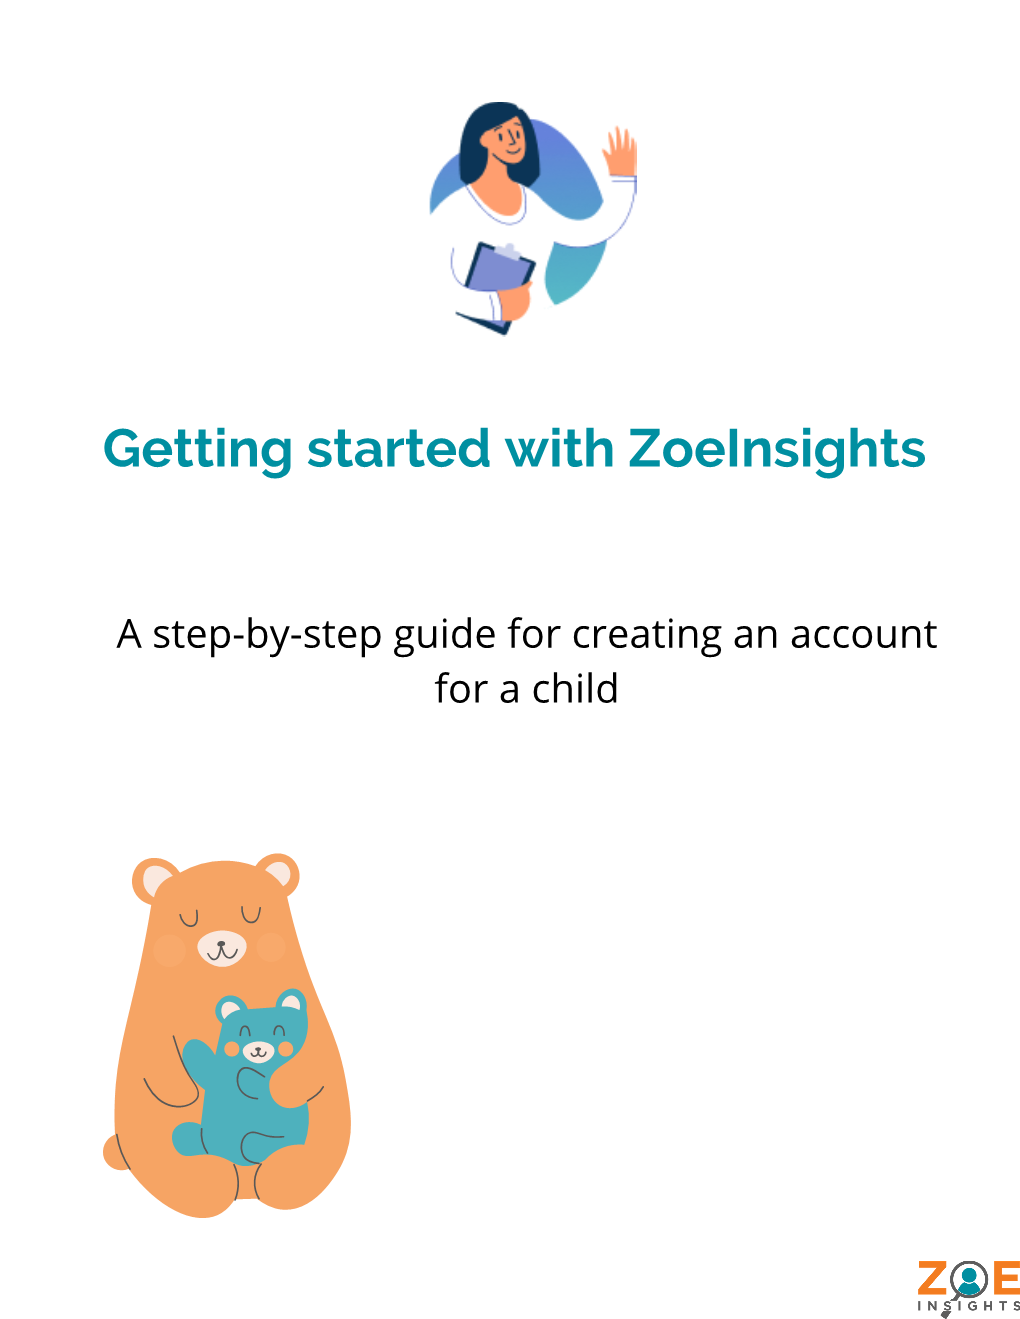 Getting Started with Zoeinsights